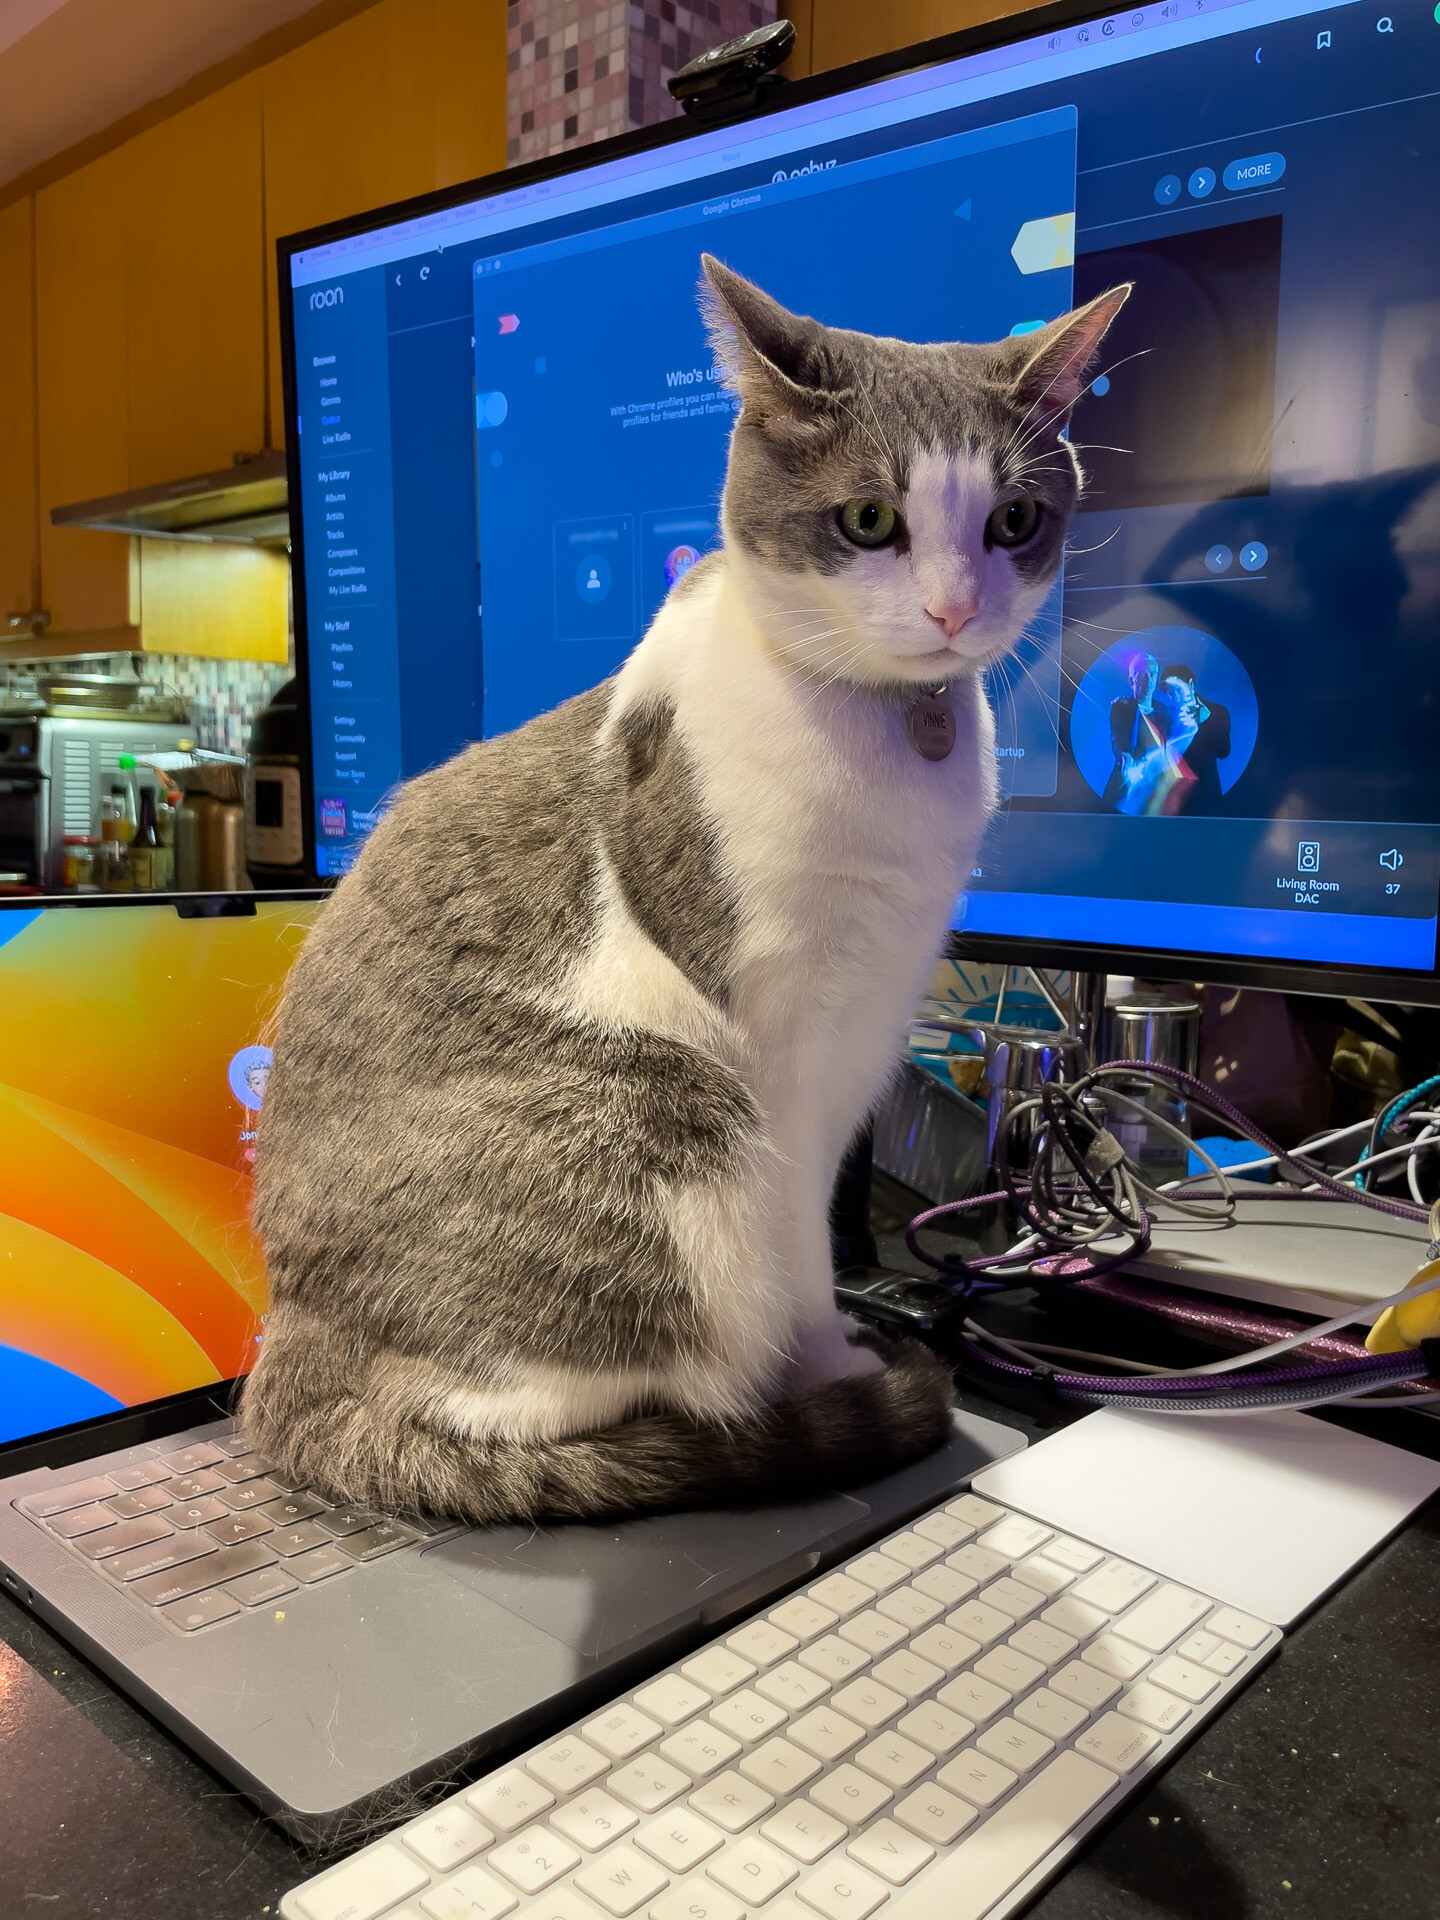 A white and gray cat, sitting on the keyboard of an open laptop computer, with a large flatscreen monitor behind him. The cat's face has an expression that a human observer would interpret as "worried".